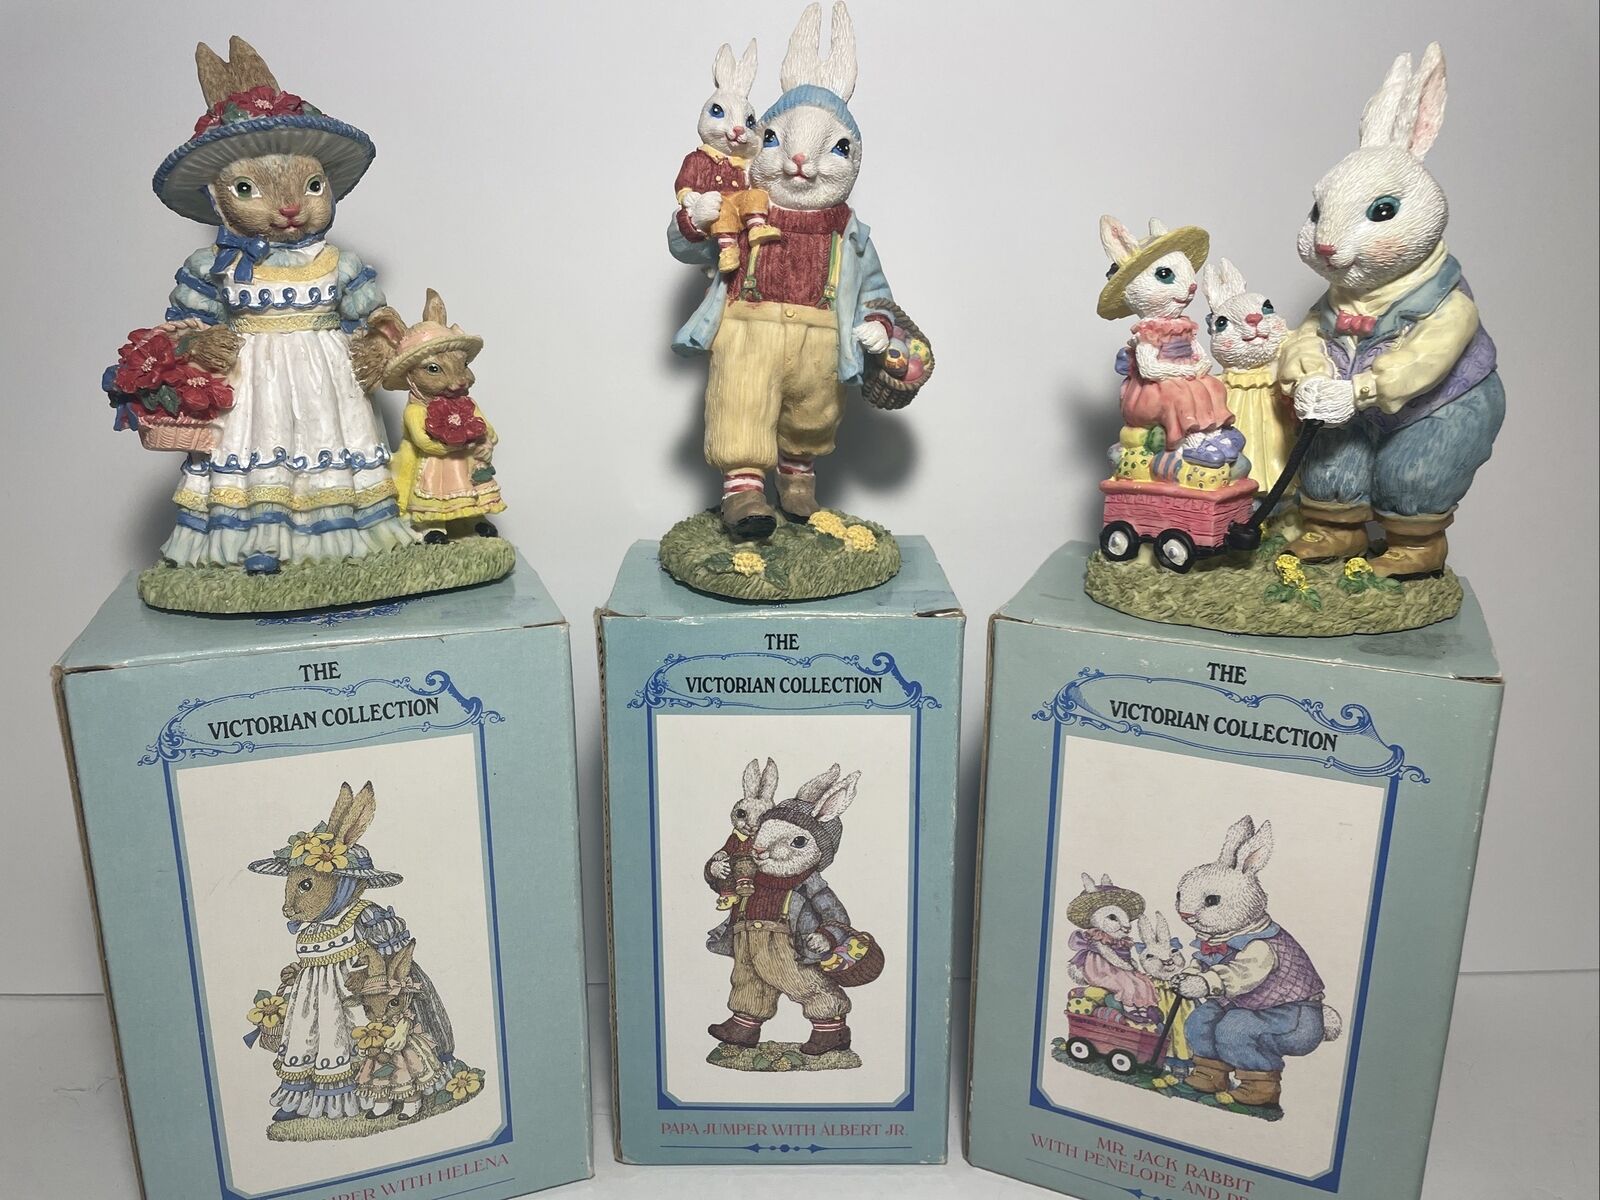 Set of 3 Dillards Ceramic The Victorian Collection Figurines in Original Boxes